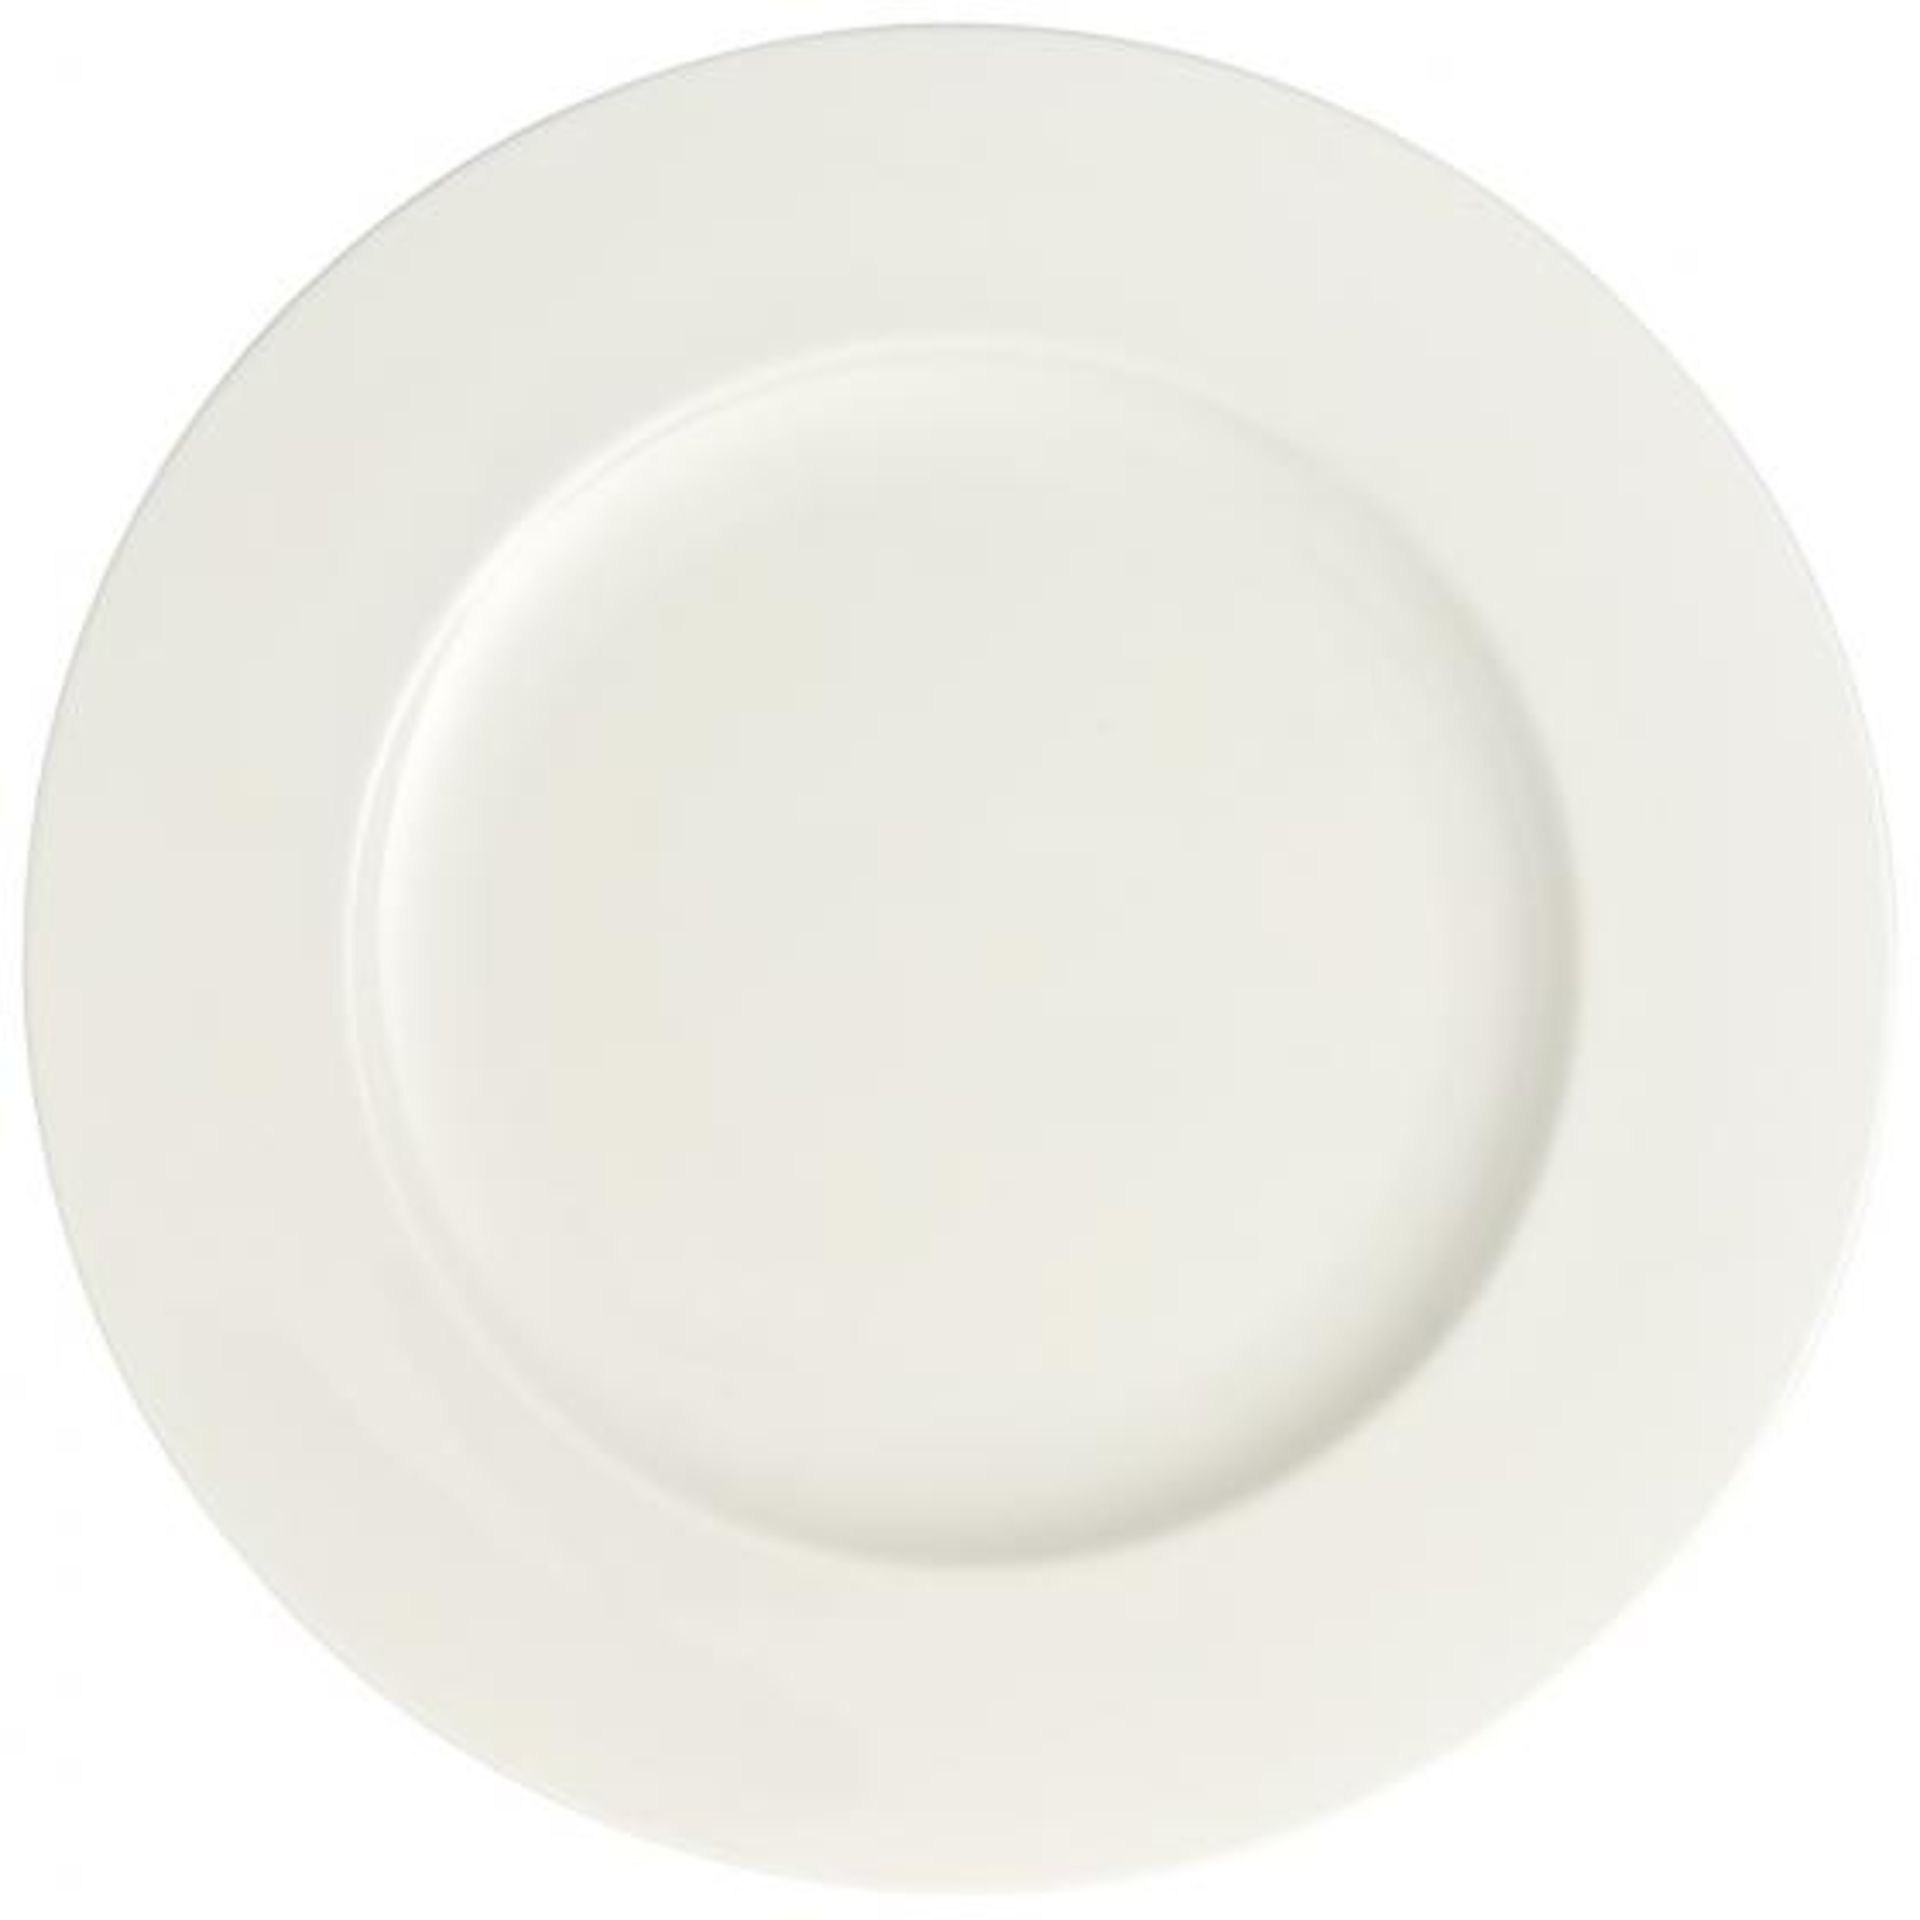 6 x Villeroy & Boch Royal Dinner Plate -290mm (29cm) - Ref: 1044122620 - New and boxed - CL011 -